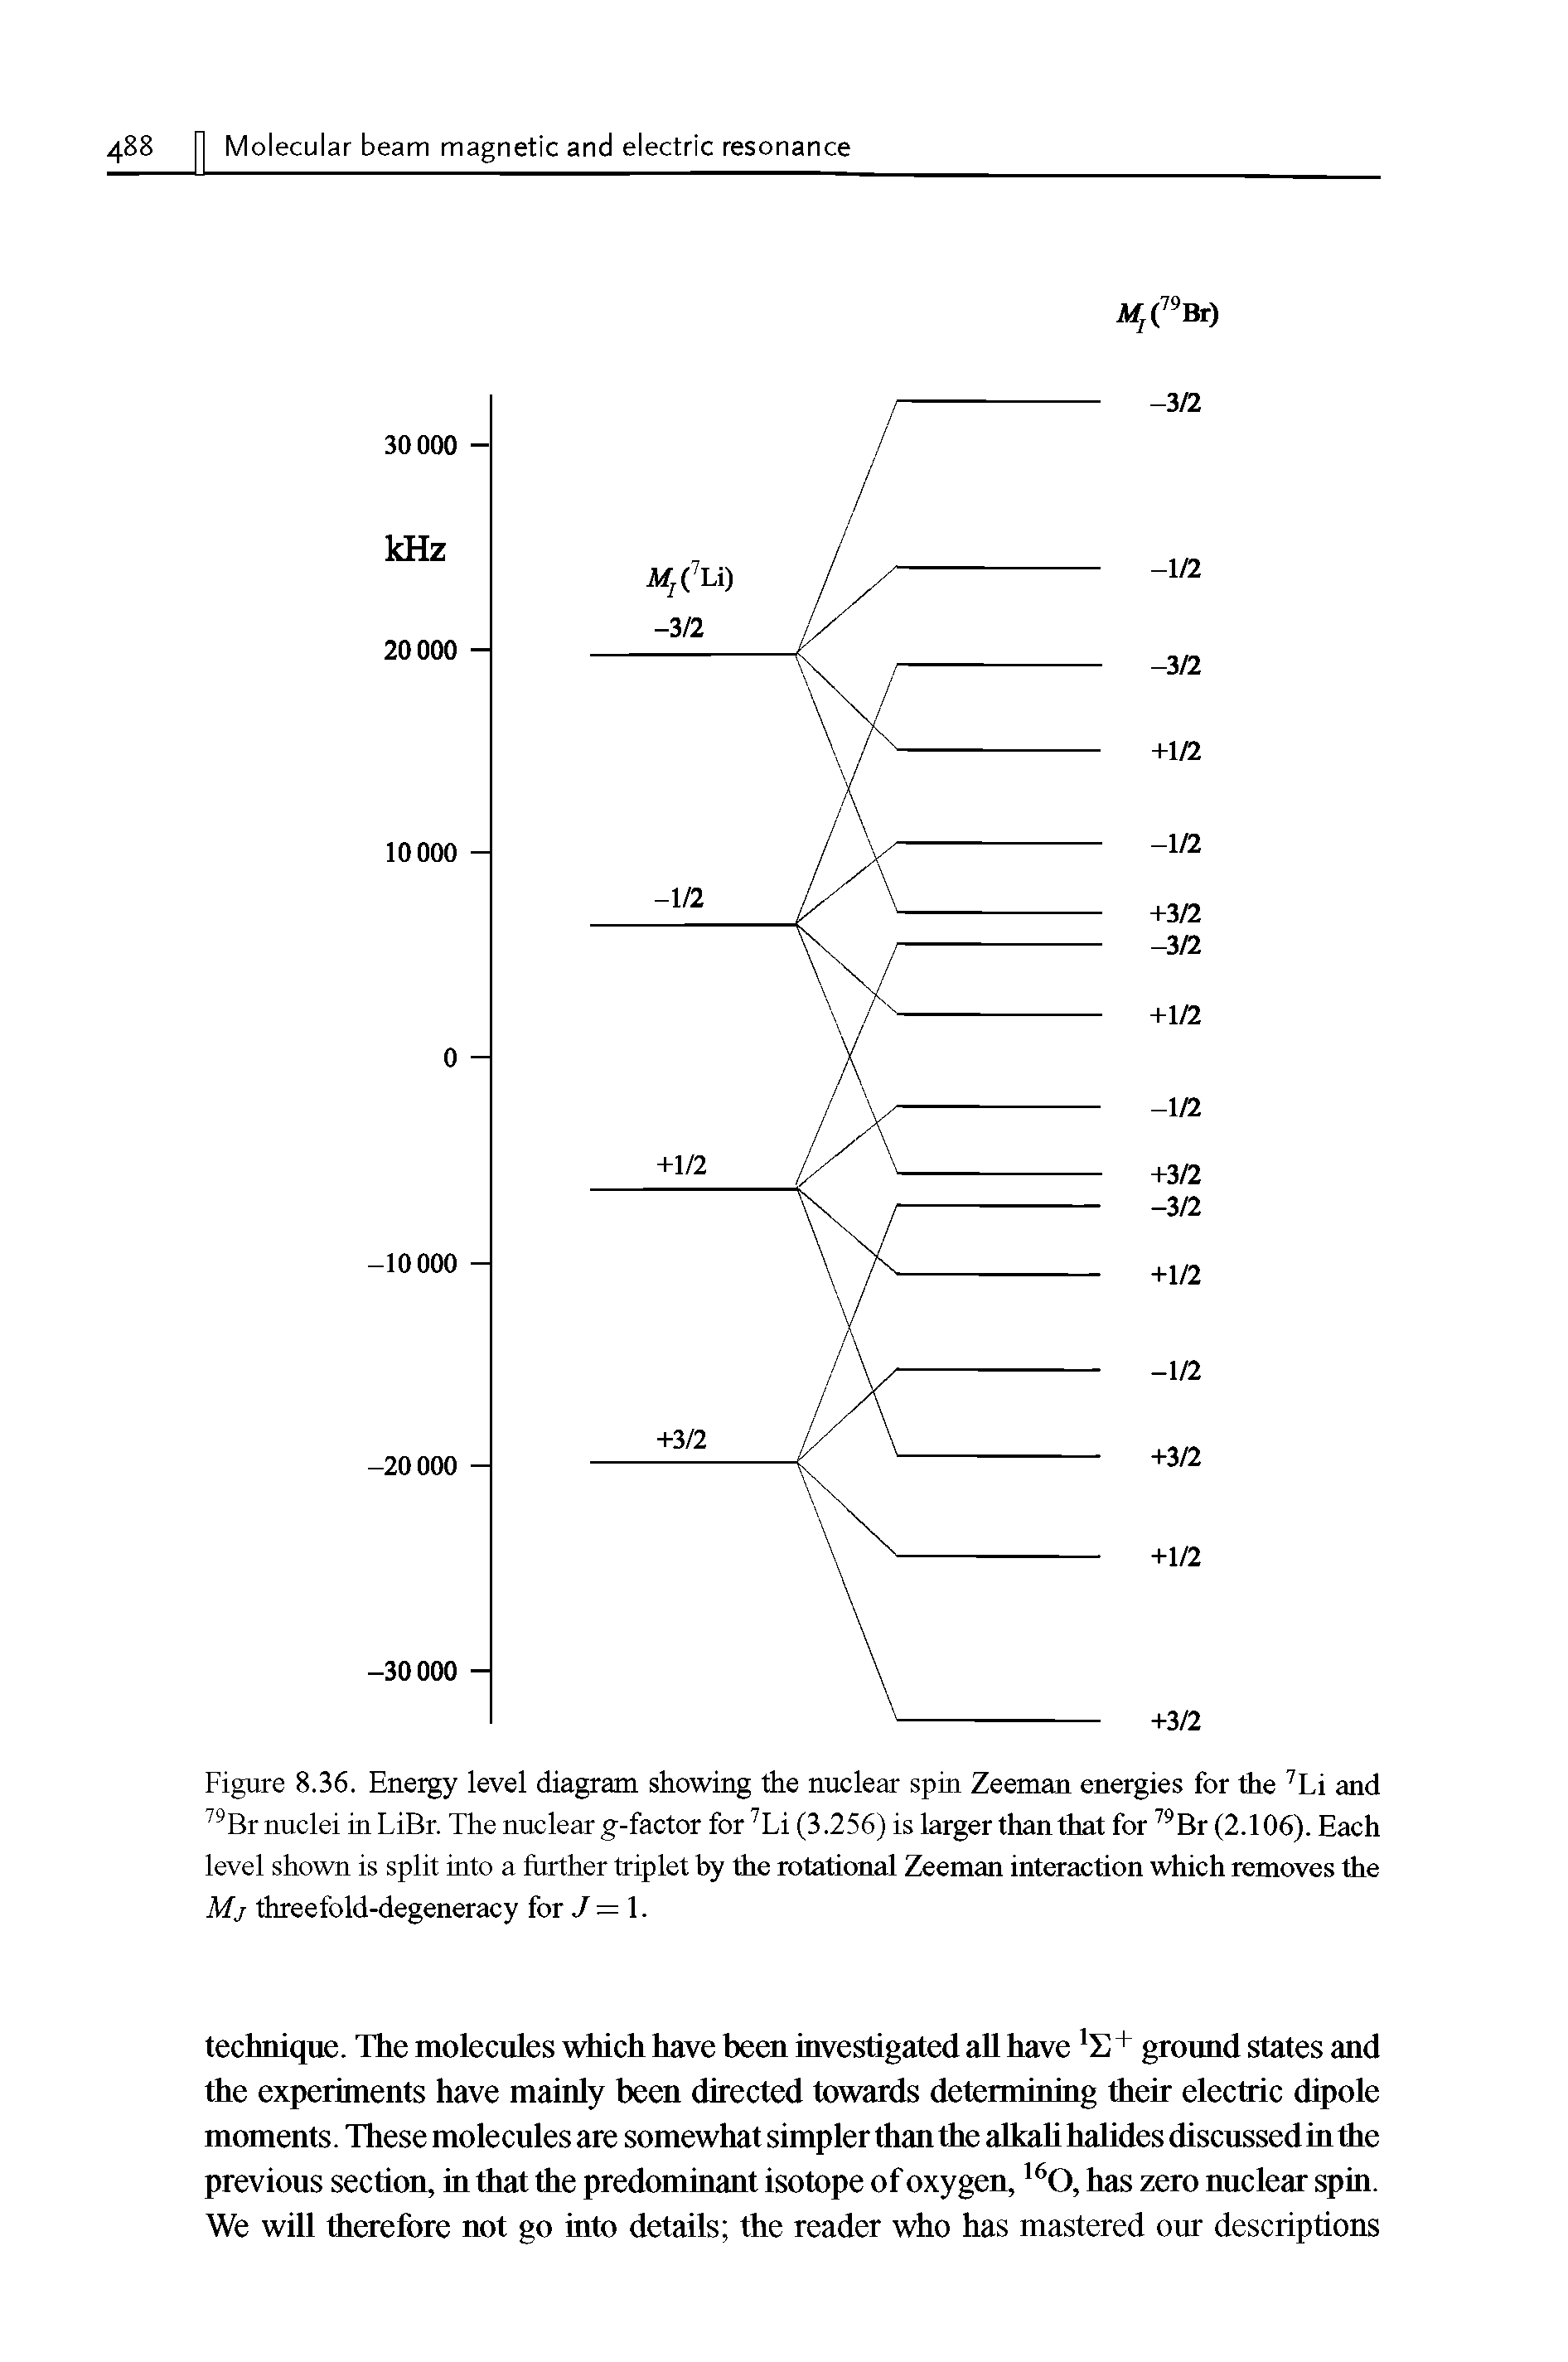 Figure 8.36. Energy level diagram showing the nuclear spin Zeeman energies for the 7Li and 79Br nuclei in LiBr. The nuclear g-factor for 7Li (3.256) is larger than that for 79Br (2.106). Each level shown is split into a further triplet by the rotational Zeeman interaction which removes the Mj threefold-degeneracy for J = 1.